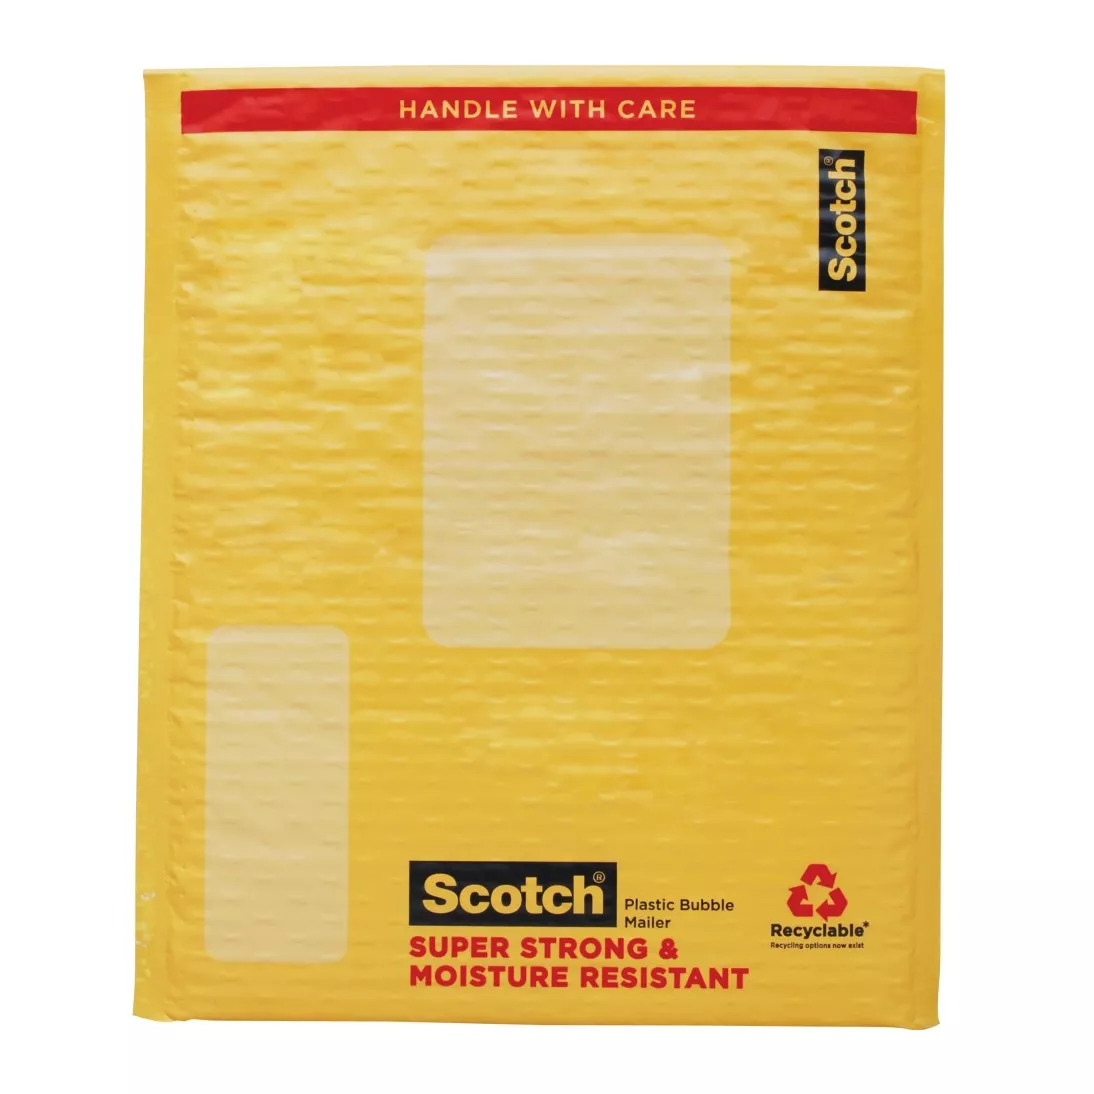 Scotch™ Poly Bubble Mailer 8974, 9.5 in x 13.5 in